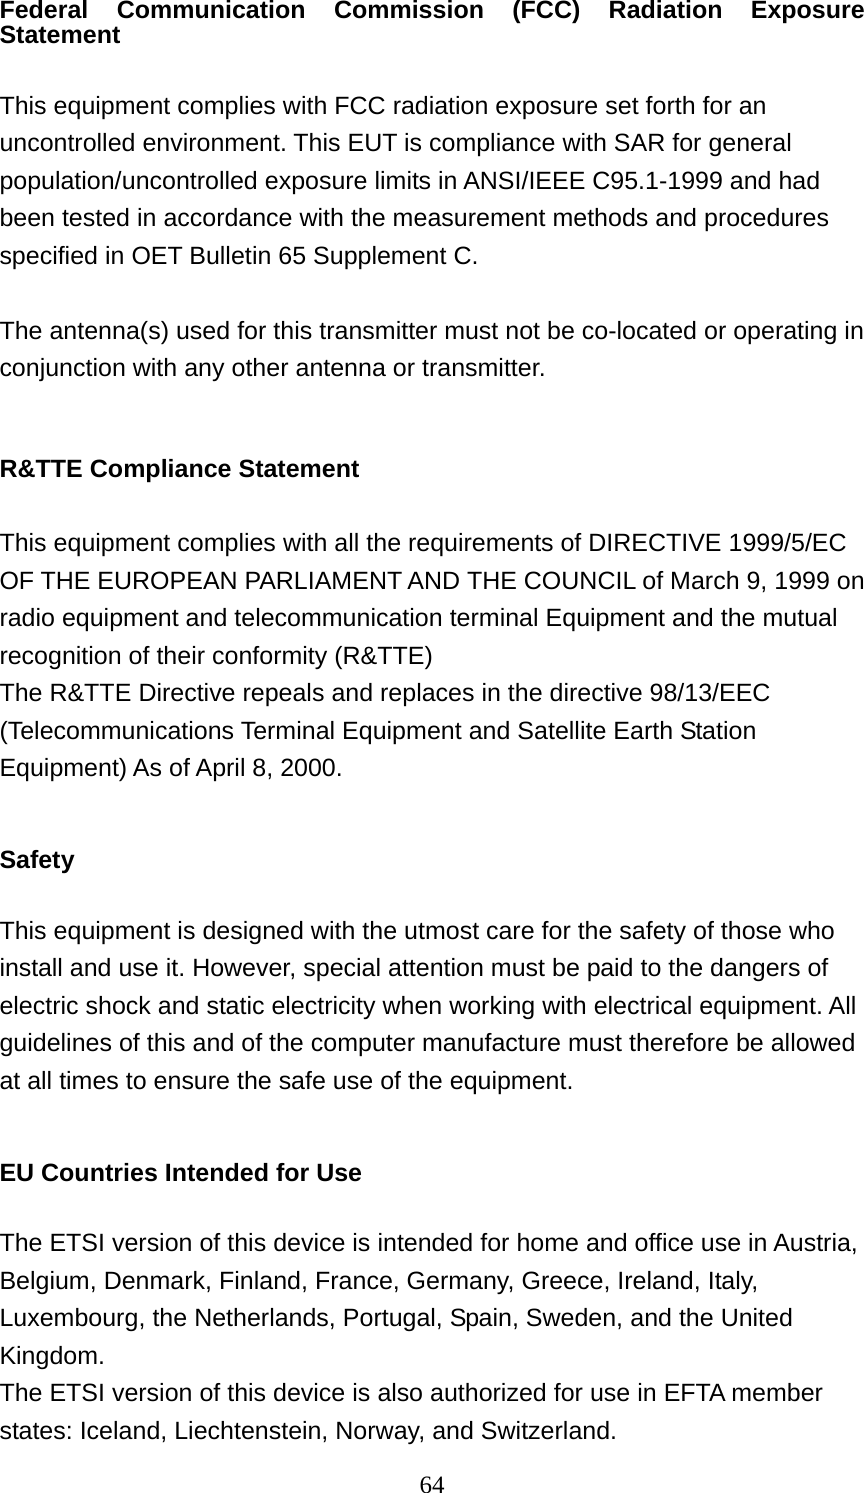  64Federal Communication Commission (FCC) Radiation Exposure Statement  This equipment complies with FCC radiation exposure set forth for an uncontrolled environment. This EUT is compliance with SAR for general population/uncontrolled exposure limits in ANSI/IEEE C95.1-1999 and had been tested in accordance with the measurement methods and procedures specified in OET Bulletin 65 Supplement C.  The antenna(s) used for this transmitter must not be co-located or operating in conjunction with any other antenna or transmitter.  R&amp;TTE Compliance Statement  This equipment complies with all the requirements of DIRECTIVE 1999/5/EC OF THE EUROPEAN PARLIAMENT AND THE COUNCIL of March 9, 1999 on radio equipment and telecommunication terminal Equipment and the mutual recognition of their conformity (R&amp;TTE) The R&amp;TTE Directive repeals and replaces in the directive 98/13/EEC (Telecommunications Terminal Equipment and Satellite Earth Station Equipment) As of April 8, 2000.  Safety  This equipment is designed with the utmost care for the safety of those who install and use it. However, special attention must be paid to the dangers of electric shock and static electricity when working with electrical equipment. All guidelines of this and of the computer manufacture must therefore be allowed at all times to ensure the safe use of the equipment.  EU Countries Intended for Use    The ETSI version of this device is intended for home and office use in Austria, Belgium, Denmark, Finland, France, Germany, Greece, Ireland, Italy, Luxembourg, the Netherlands, Portugal, Spain, Sweden, and the United Kingdom. The ETSI version of this device is also authorized for use in EFTA member states: Iceland, Liechtenstein, Norway, and Switzerland. 